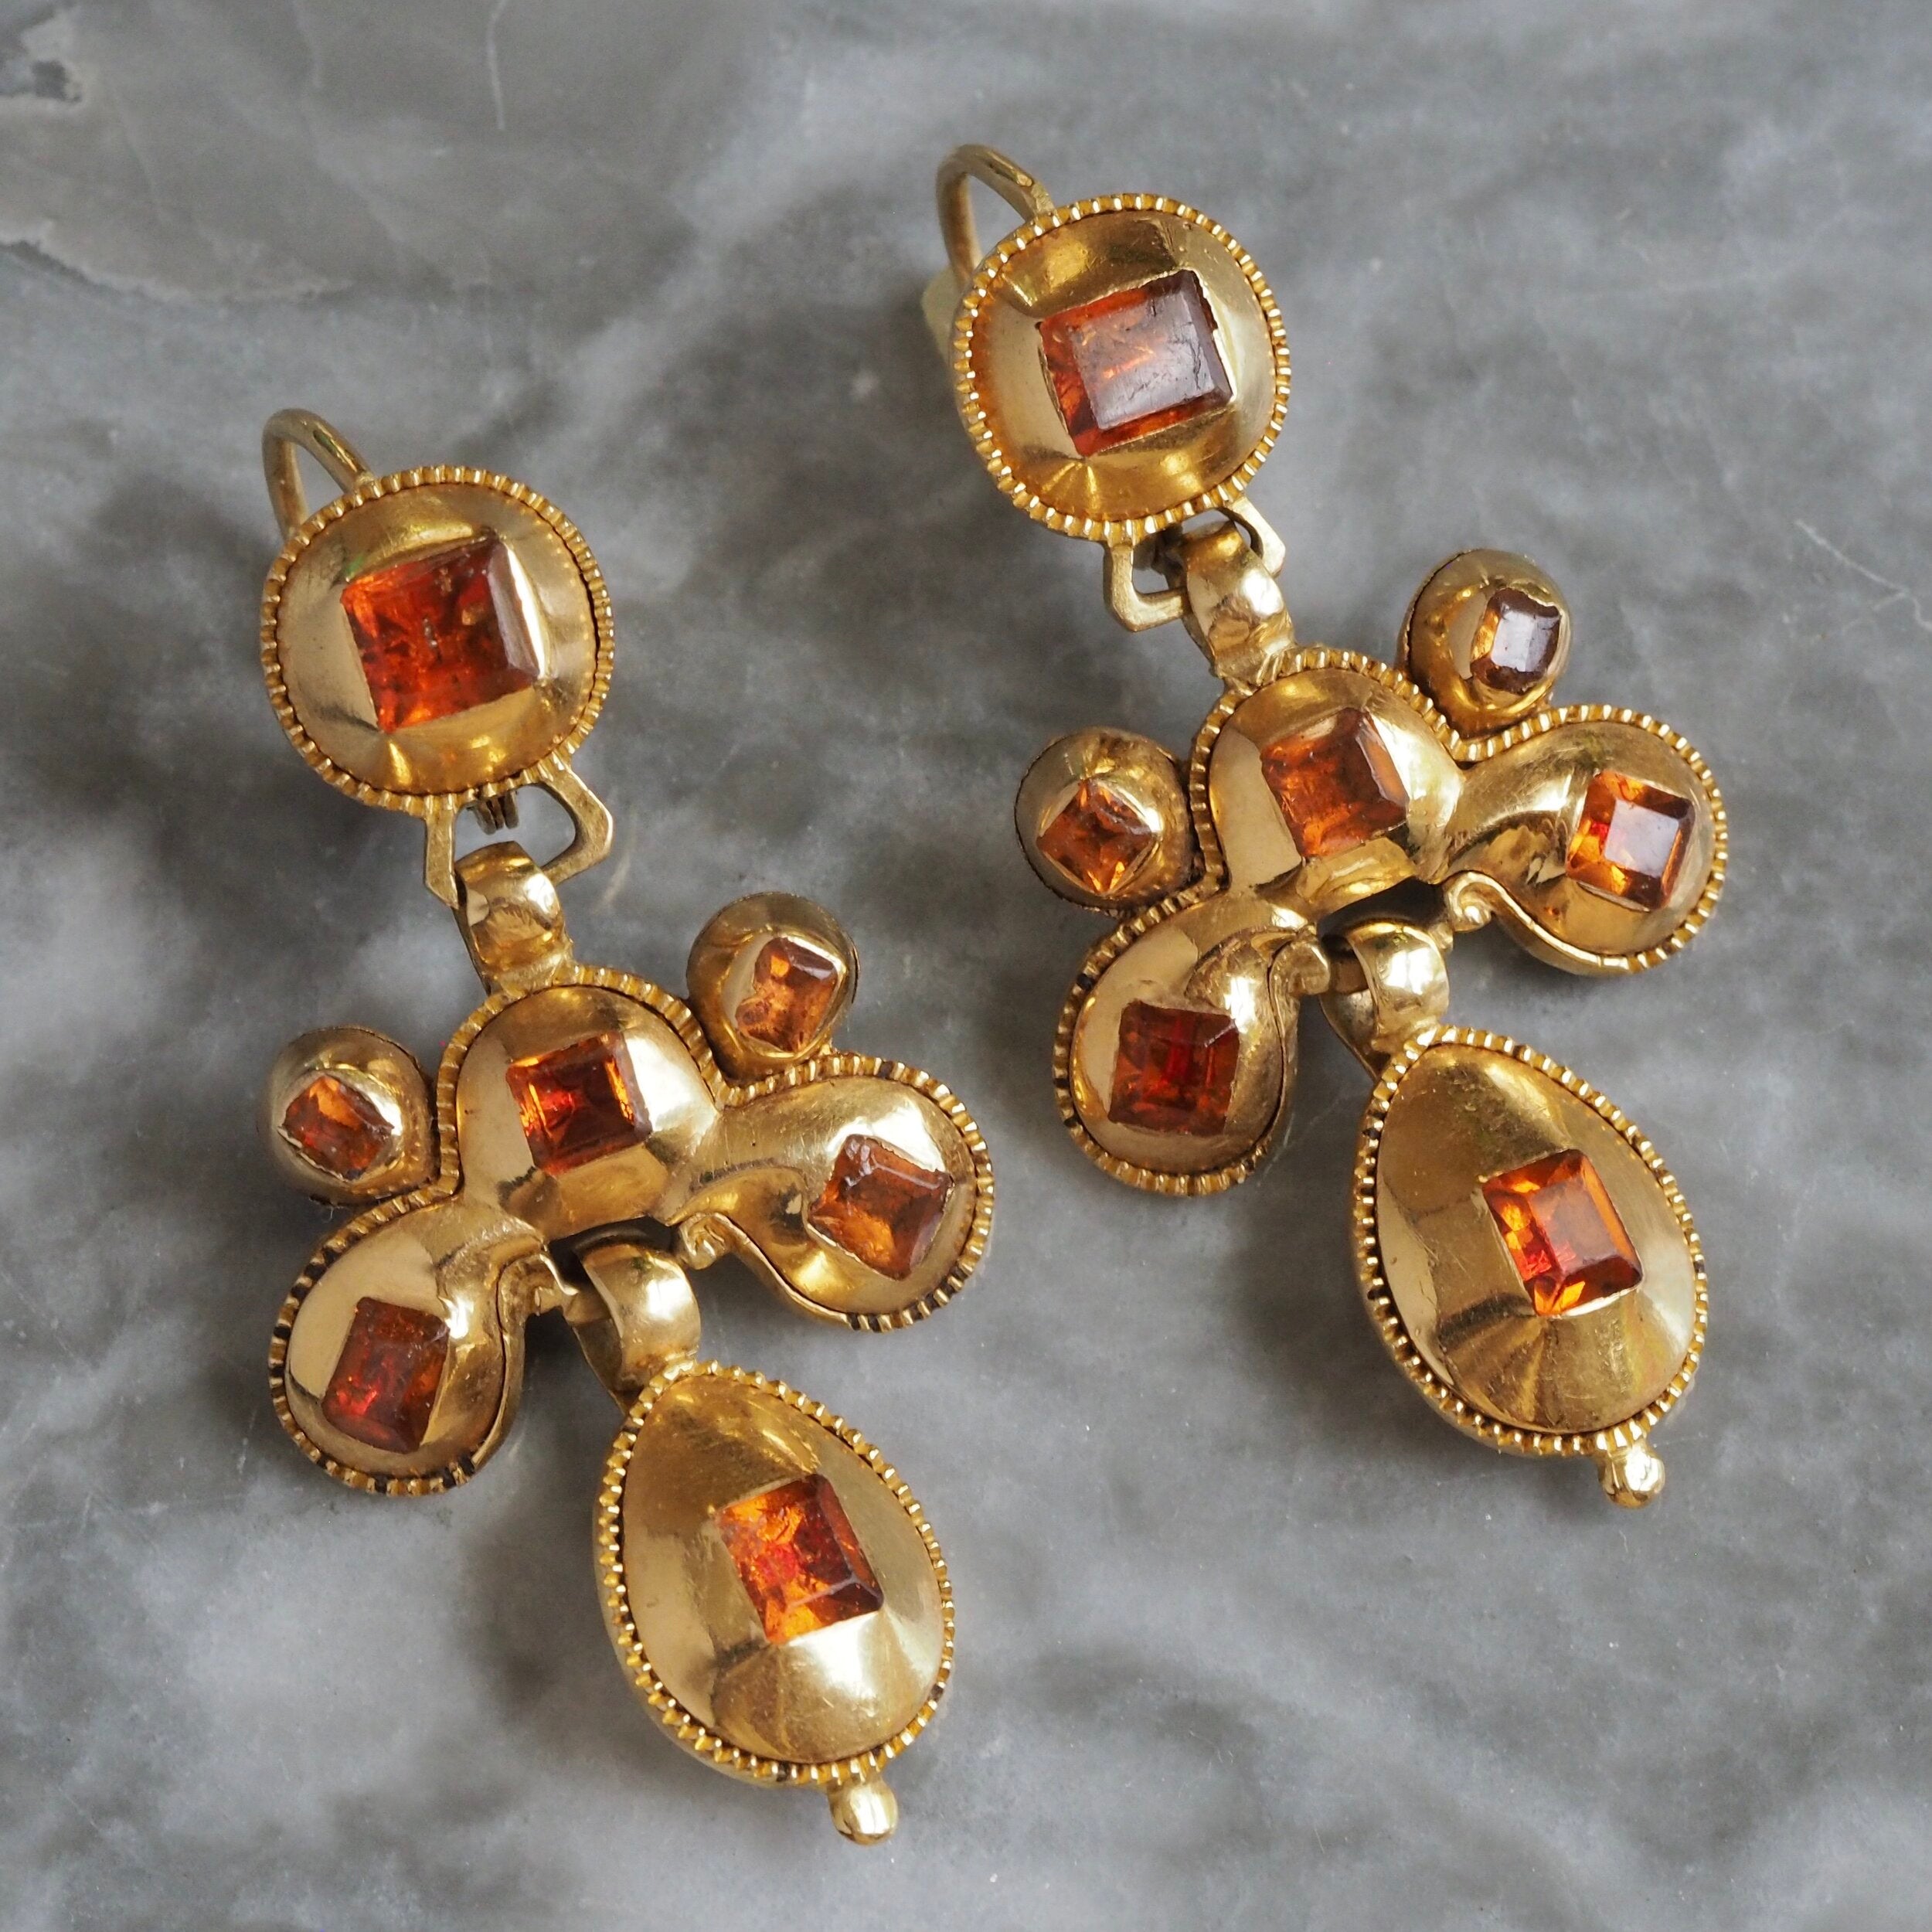 18th Century Catalan Iberian Pendeloque Earrings in 18k Gold with Hessonite Garnets